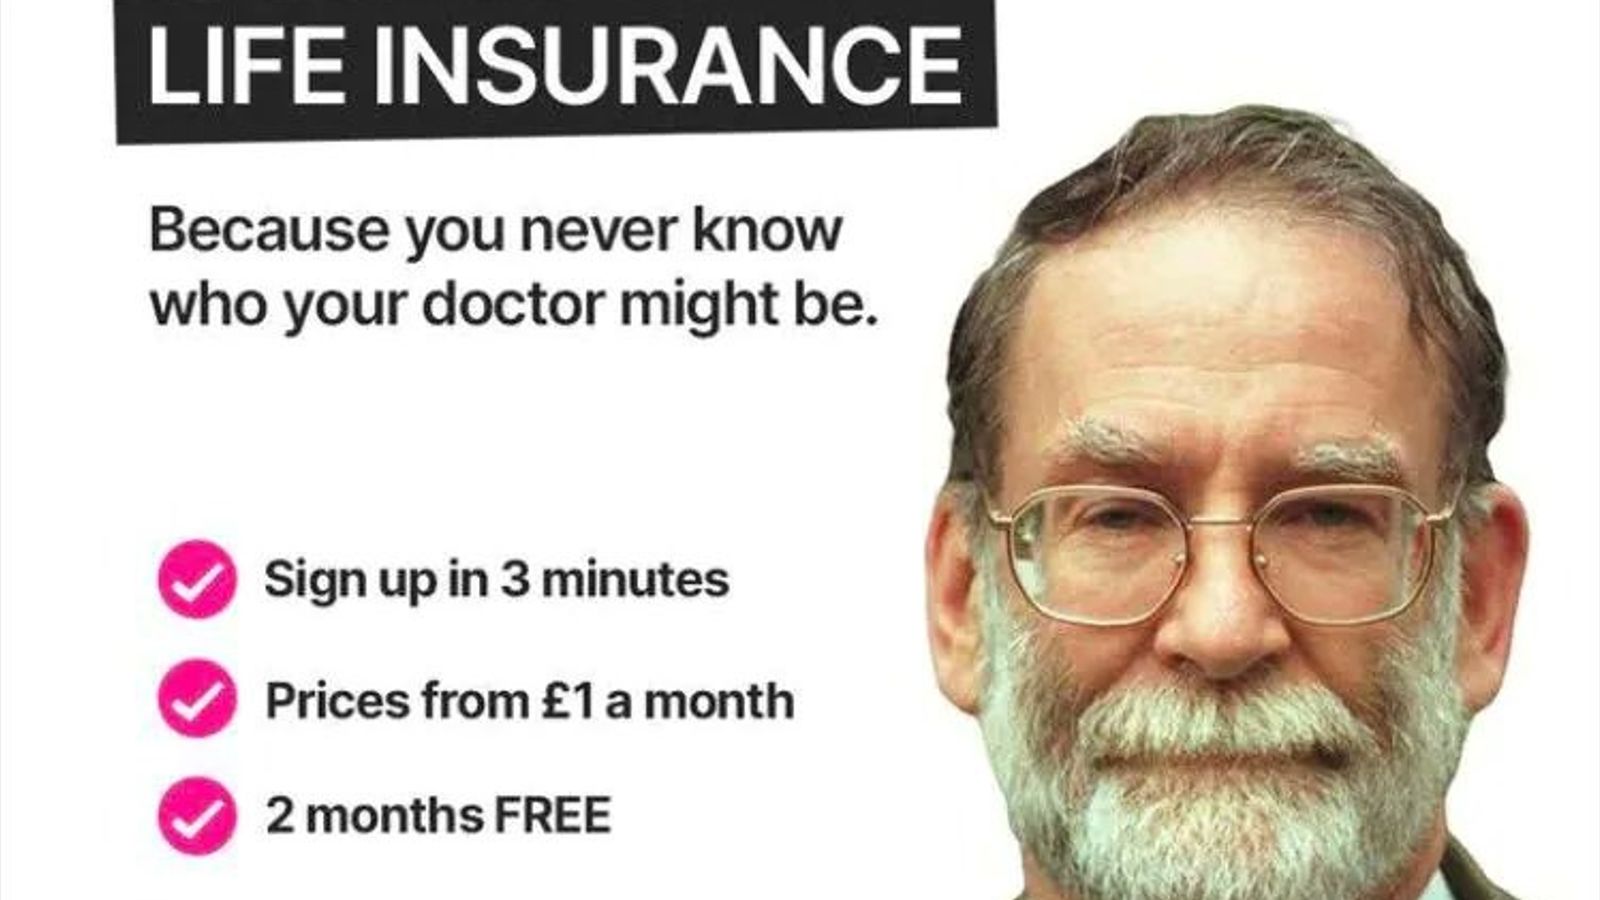 ‘Absolutely disgusting’: Life insurance firm uses picture of serial killer Harold Shipman in advert | UK News